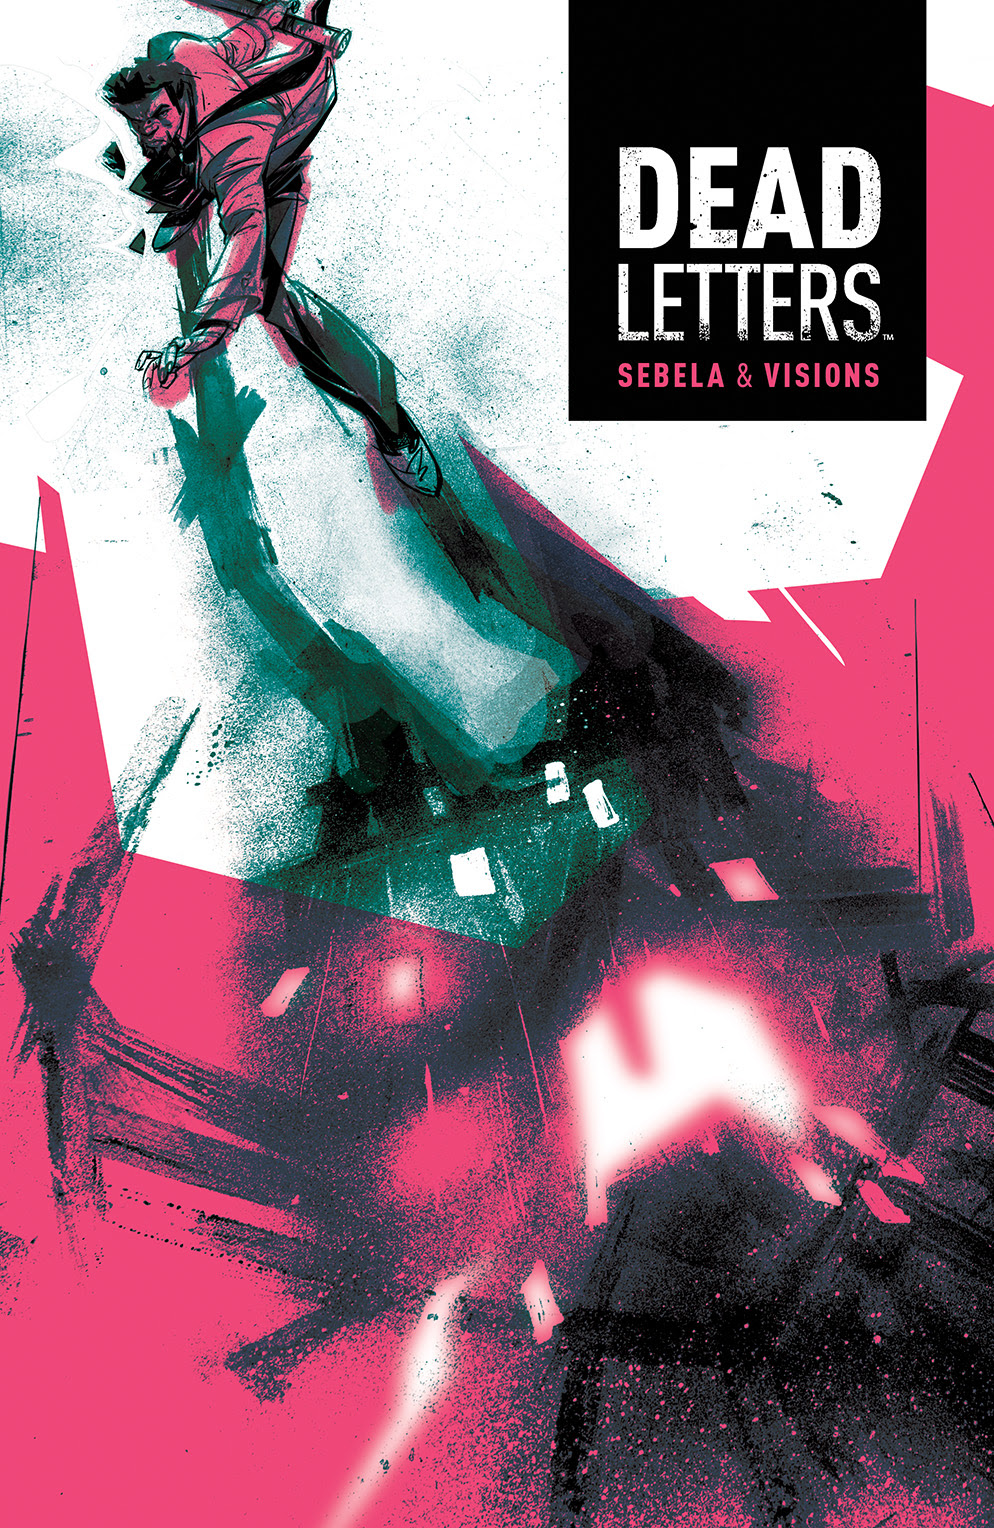 DEAD LETTERS #8 Cover by Chris Visions